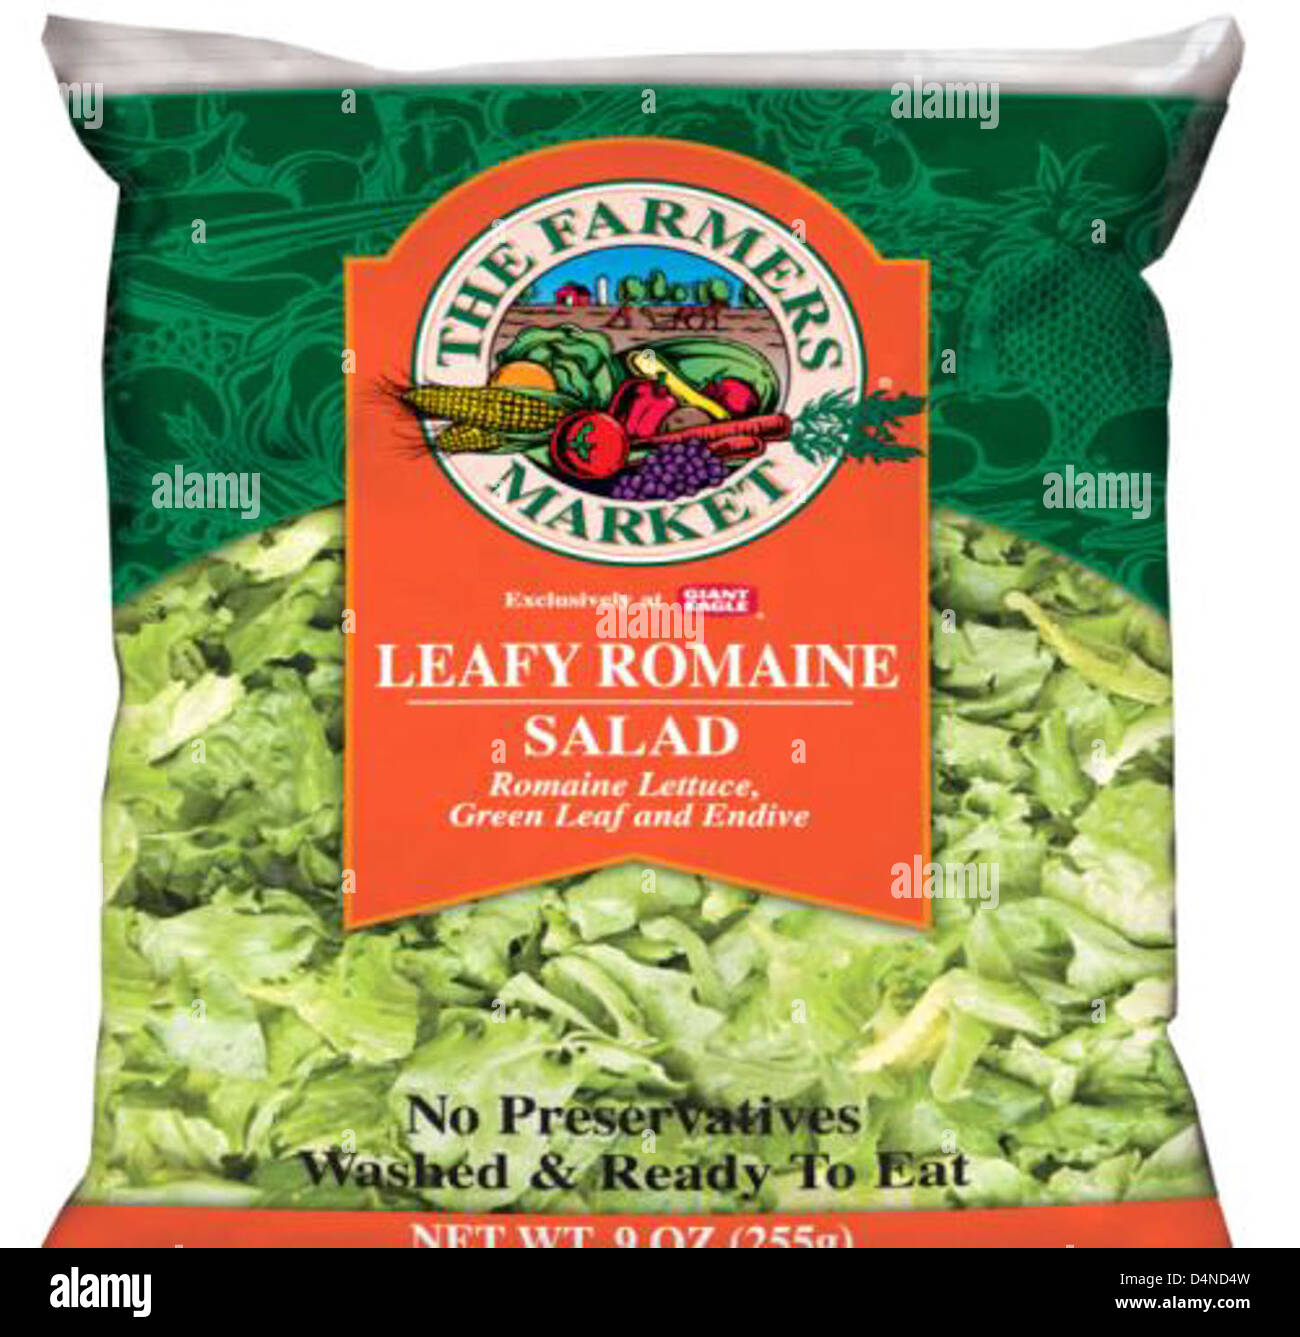 RECALLED Various bagged salad products Stock Photo Alamy